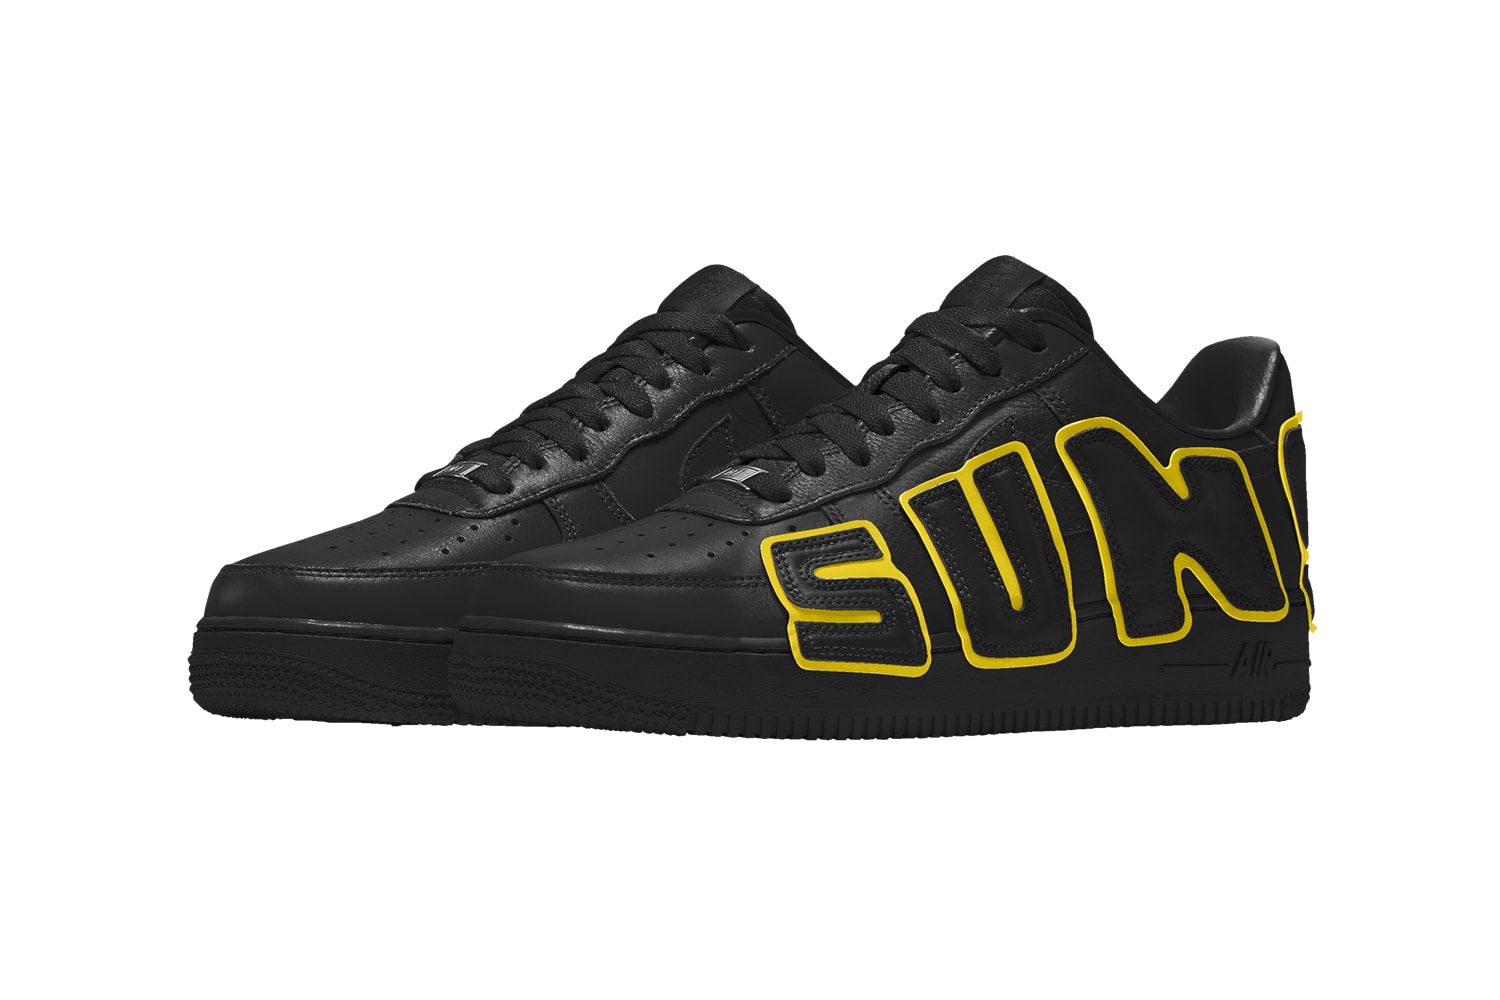 CPFM x ナイキ エアフォース1 カクタスプラントフリーマーケット Cactus Plant Flea Market Nike Air Force 1 By You Official Look Black White Yellow Red Release Info Date Buy Capsule 